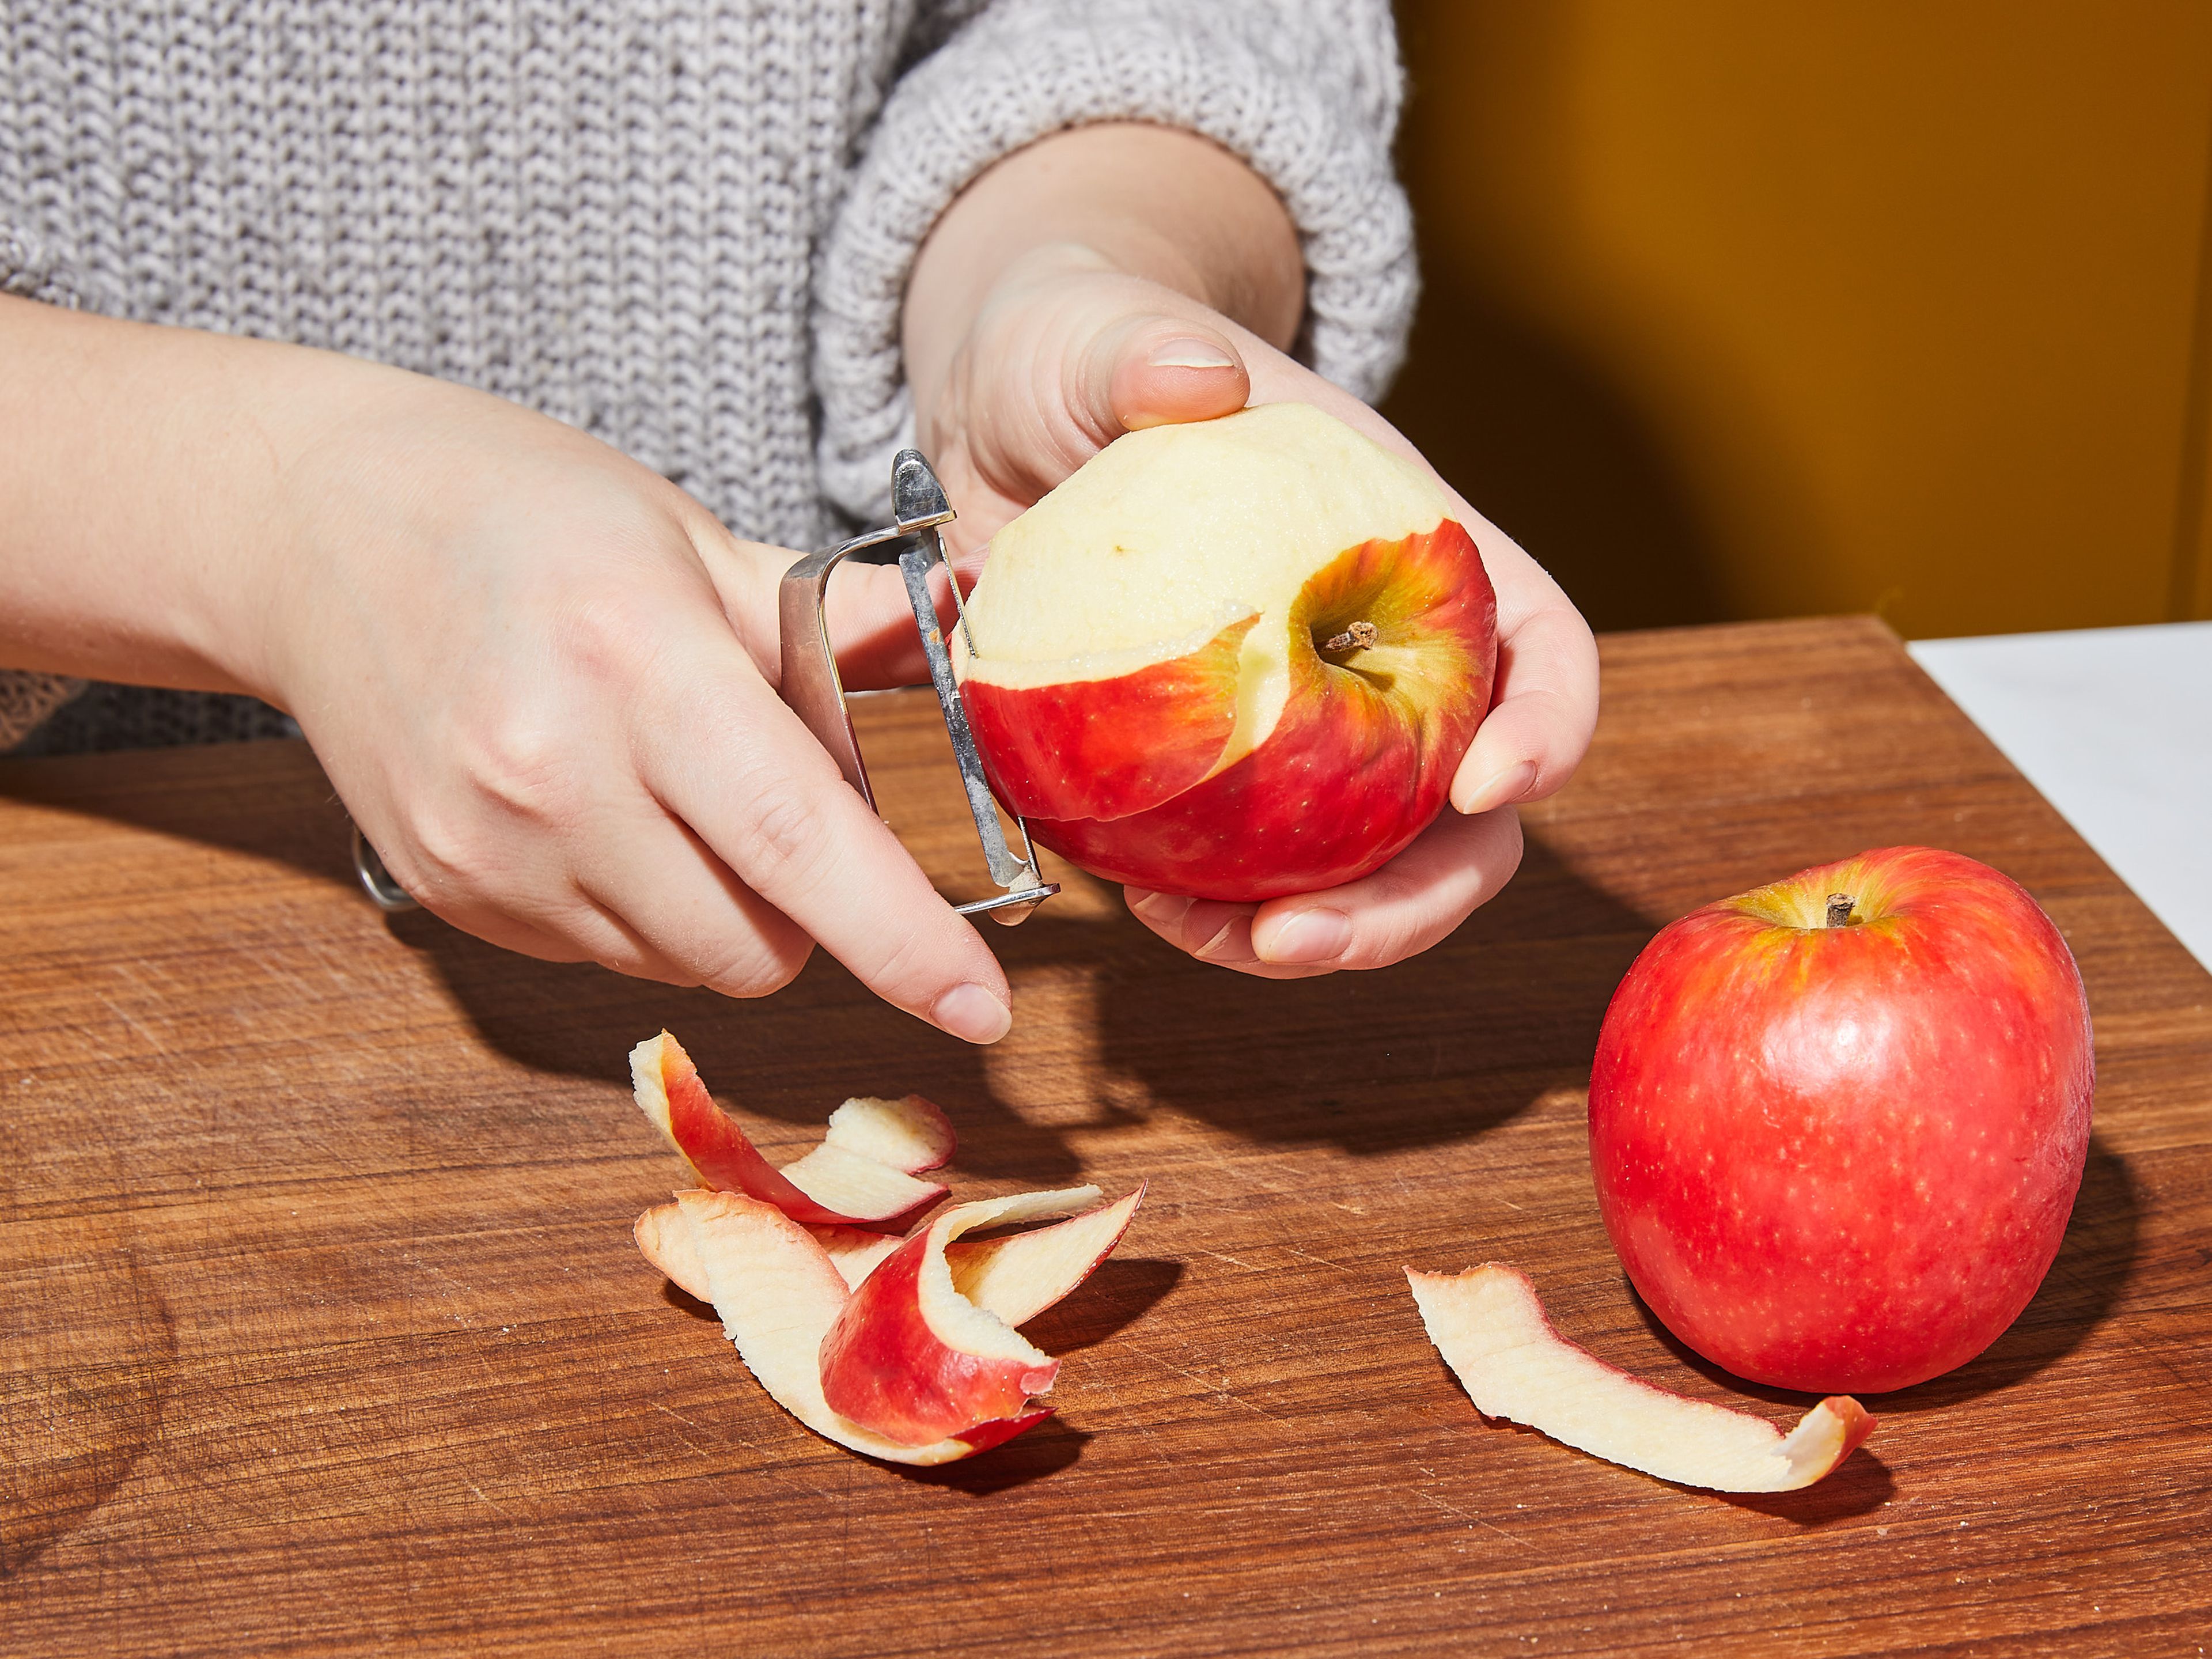 Peel, core, and chop apples into small pieces. Place into a small saucepan with a pinch of cinnamon and lemon juice and cook over low to medium heat for approx. 5 min., or until apples are tender.